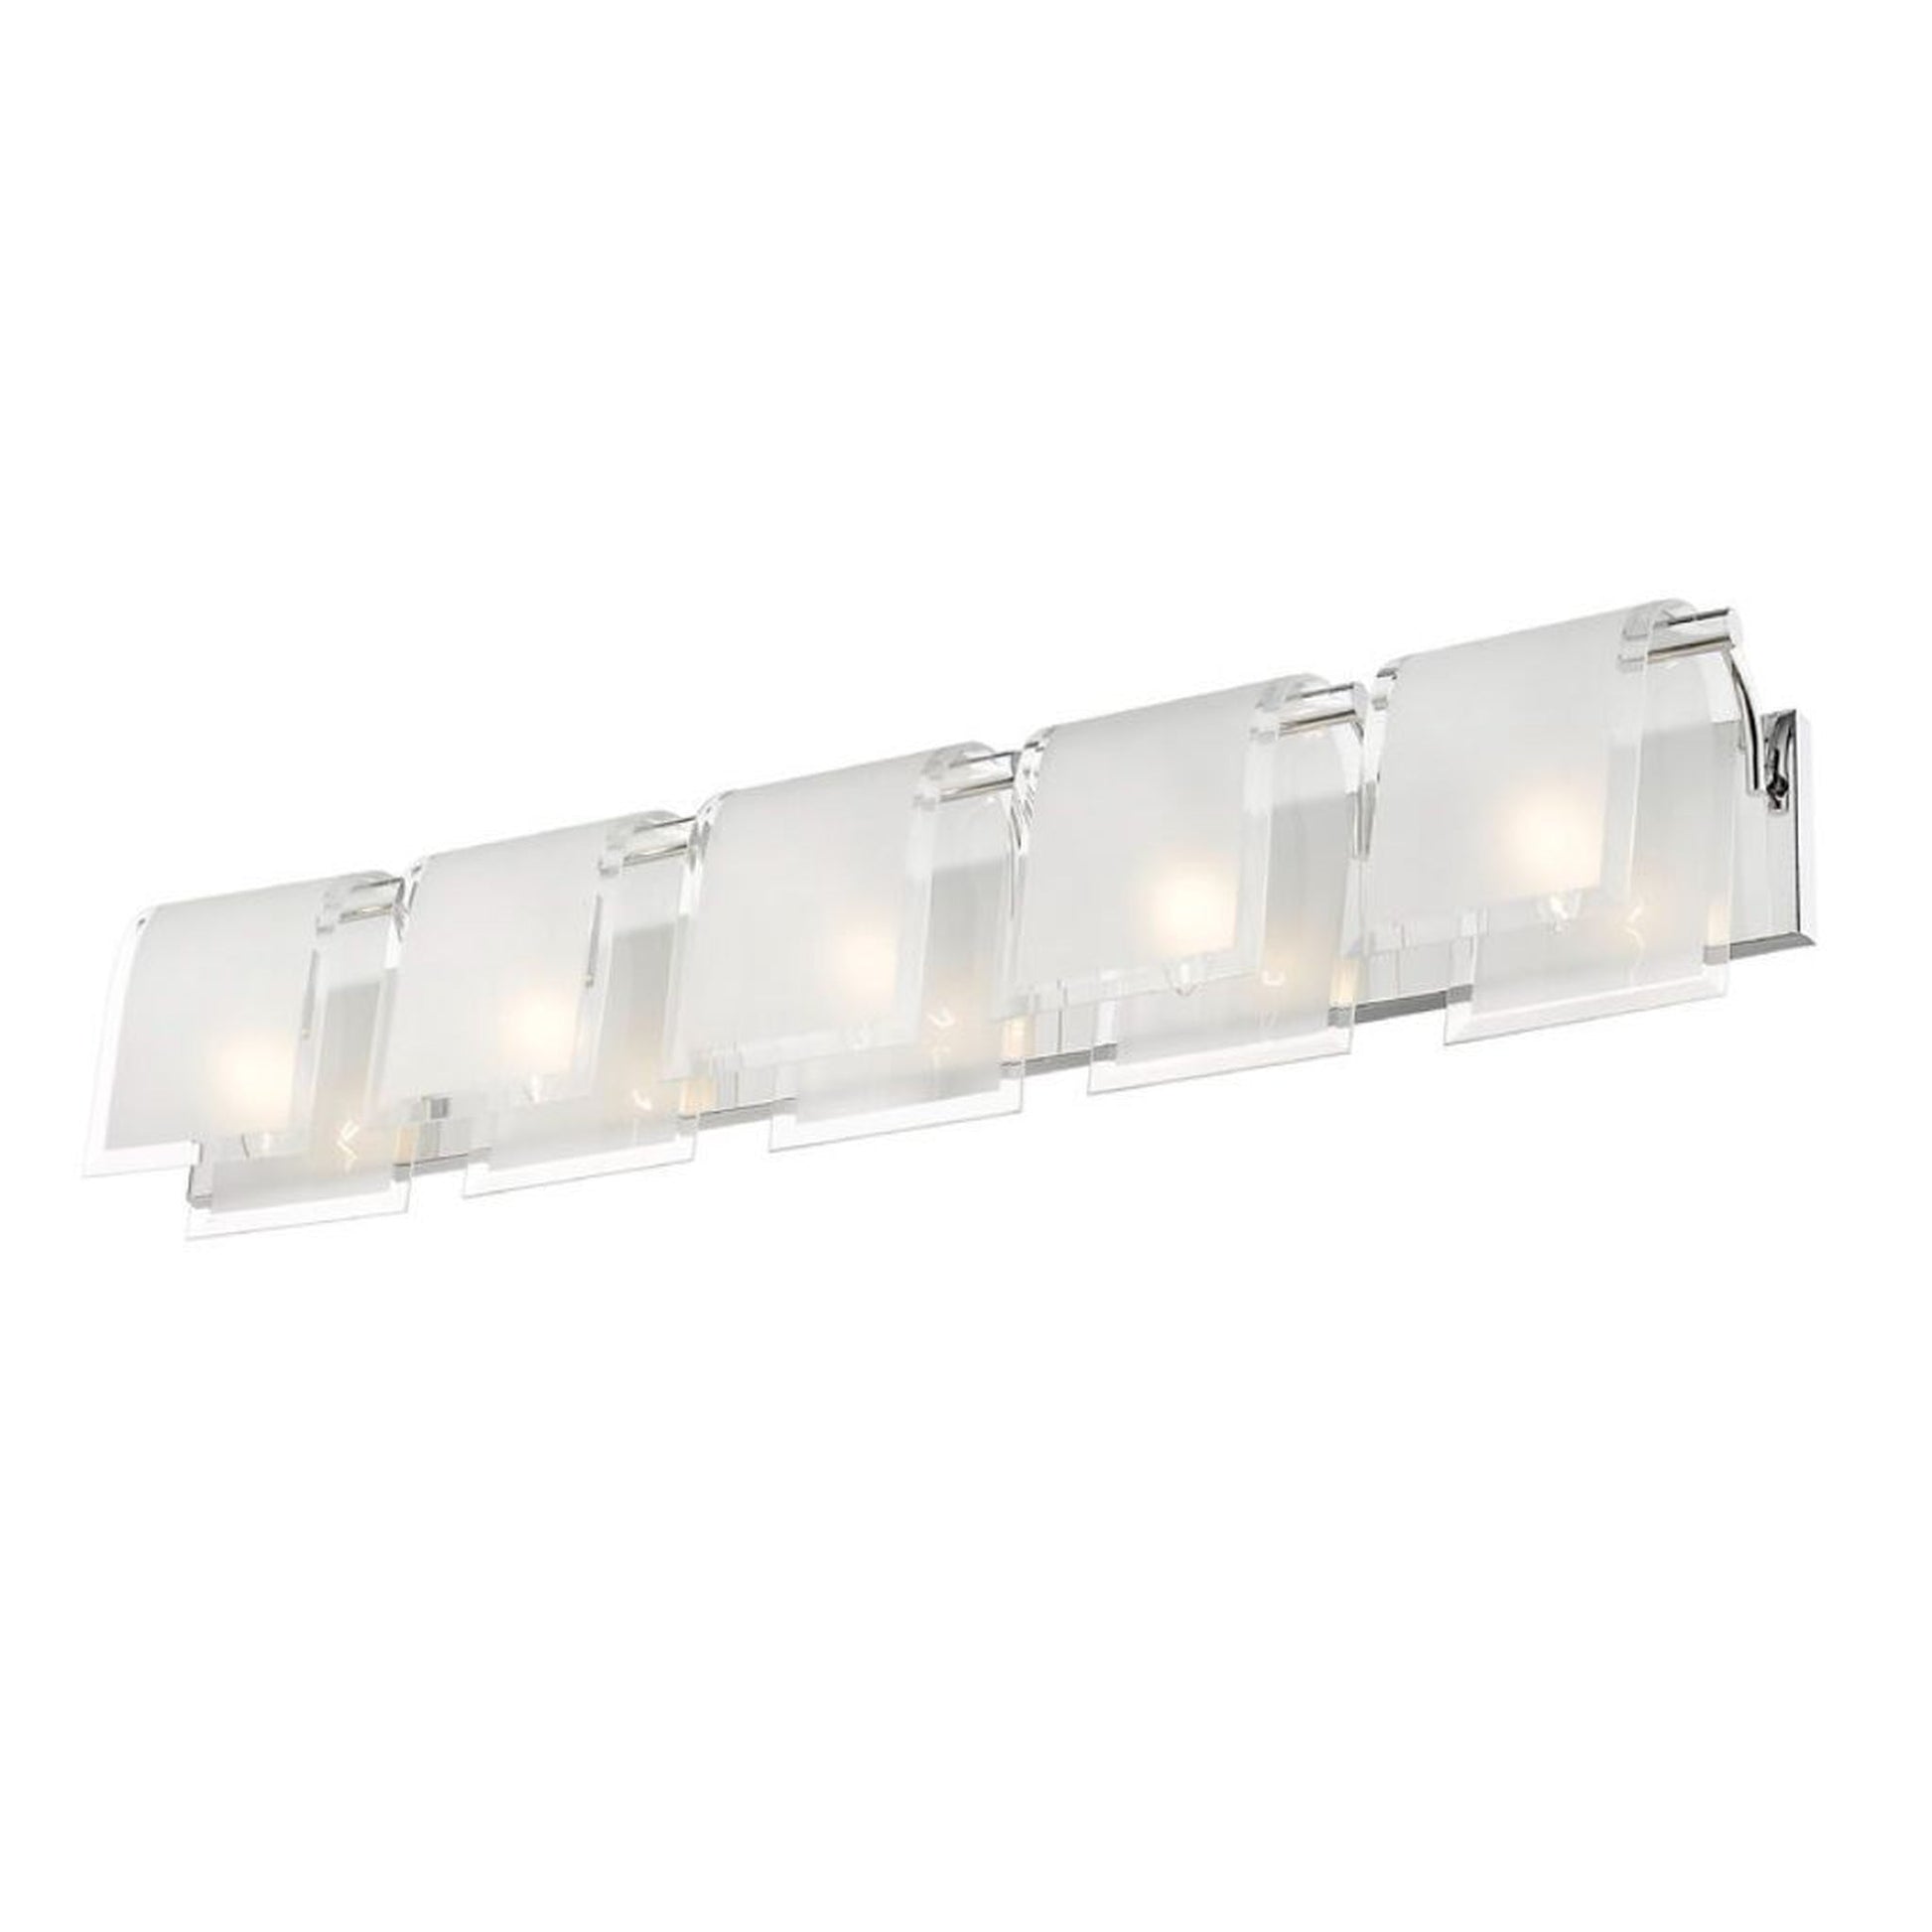 Z-Lite Zephyr 38" 5-Light Chrome Vanity Light With Clear Beveled and Frosted Glass Shade